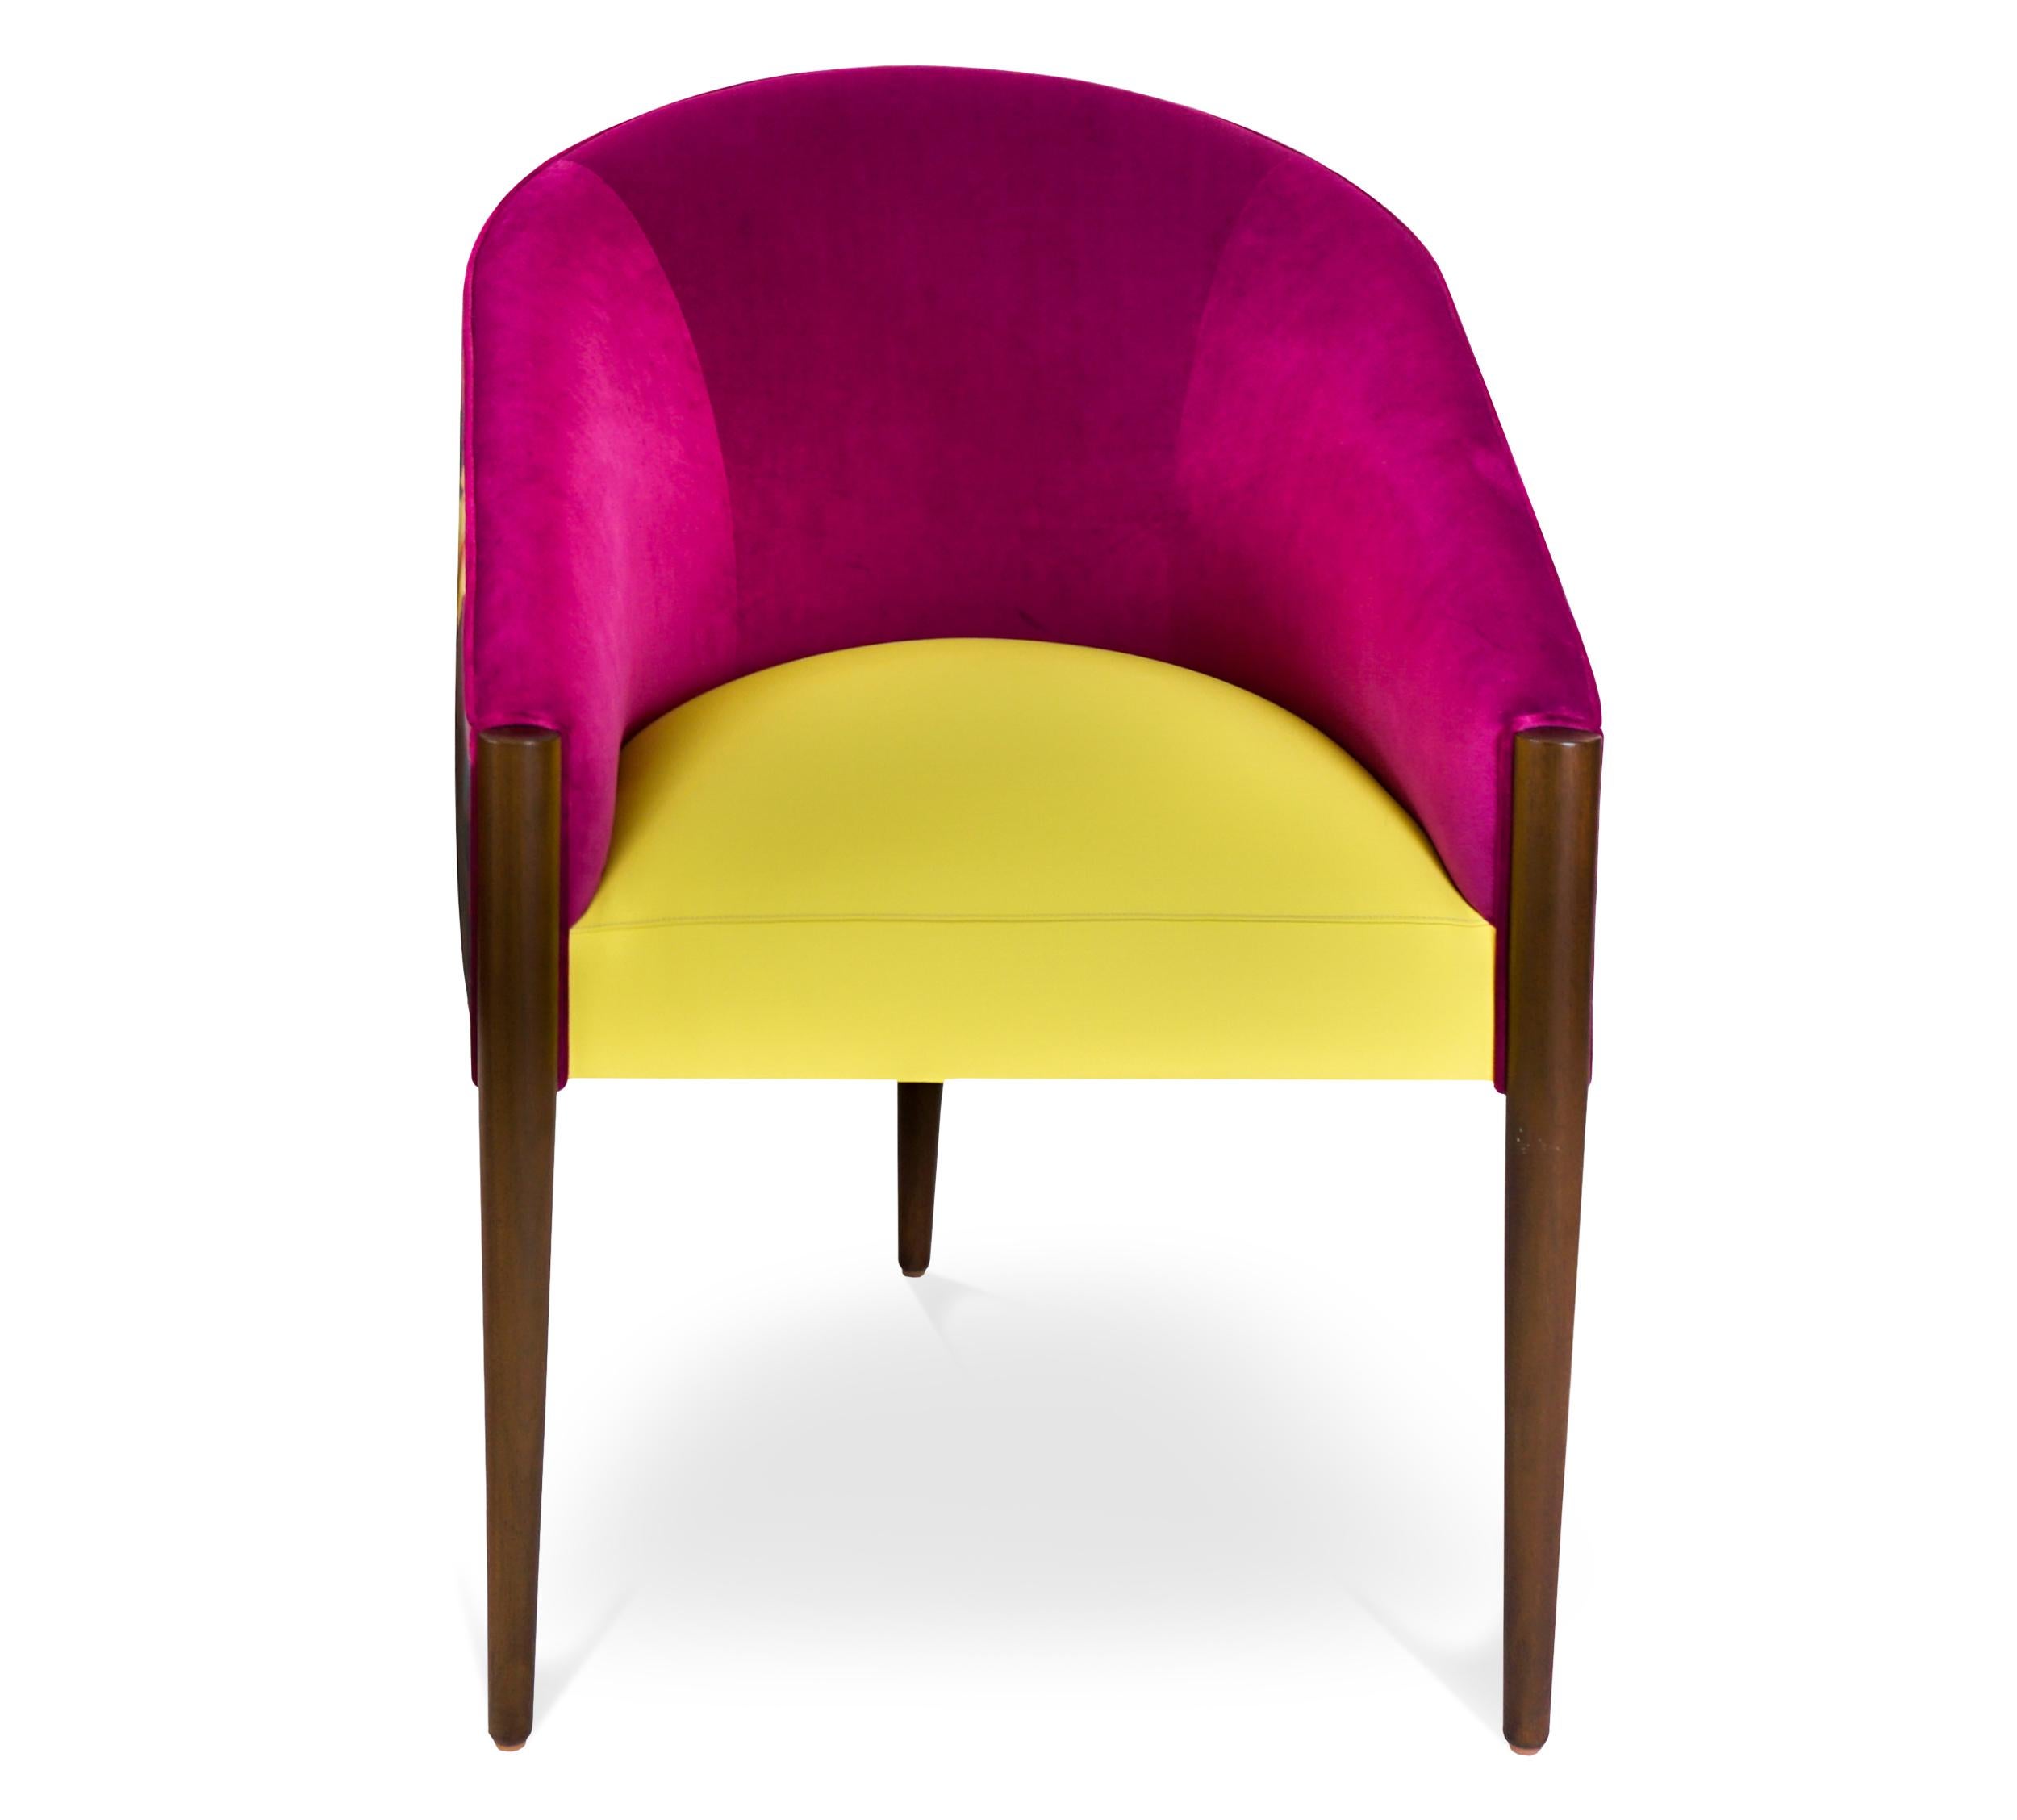 Fully customizable three-legged dining chair with bucket frame and slope arm. Made to feature three materials but can be upholstered all in one. As shown, fuchsia performance low pile velvet on inside back, baby dandelion vinyl seat and faux silk